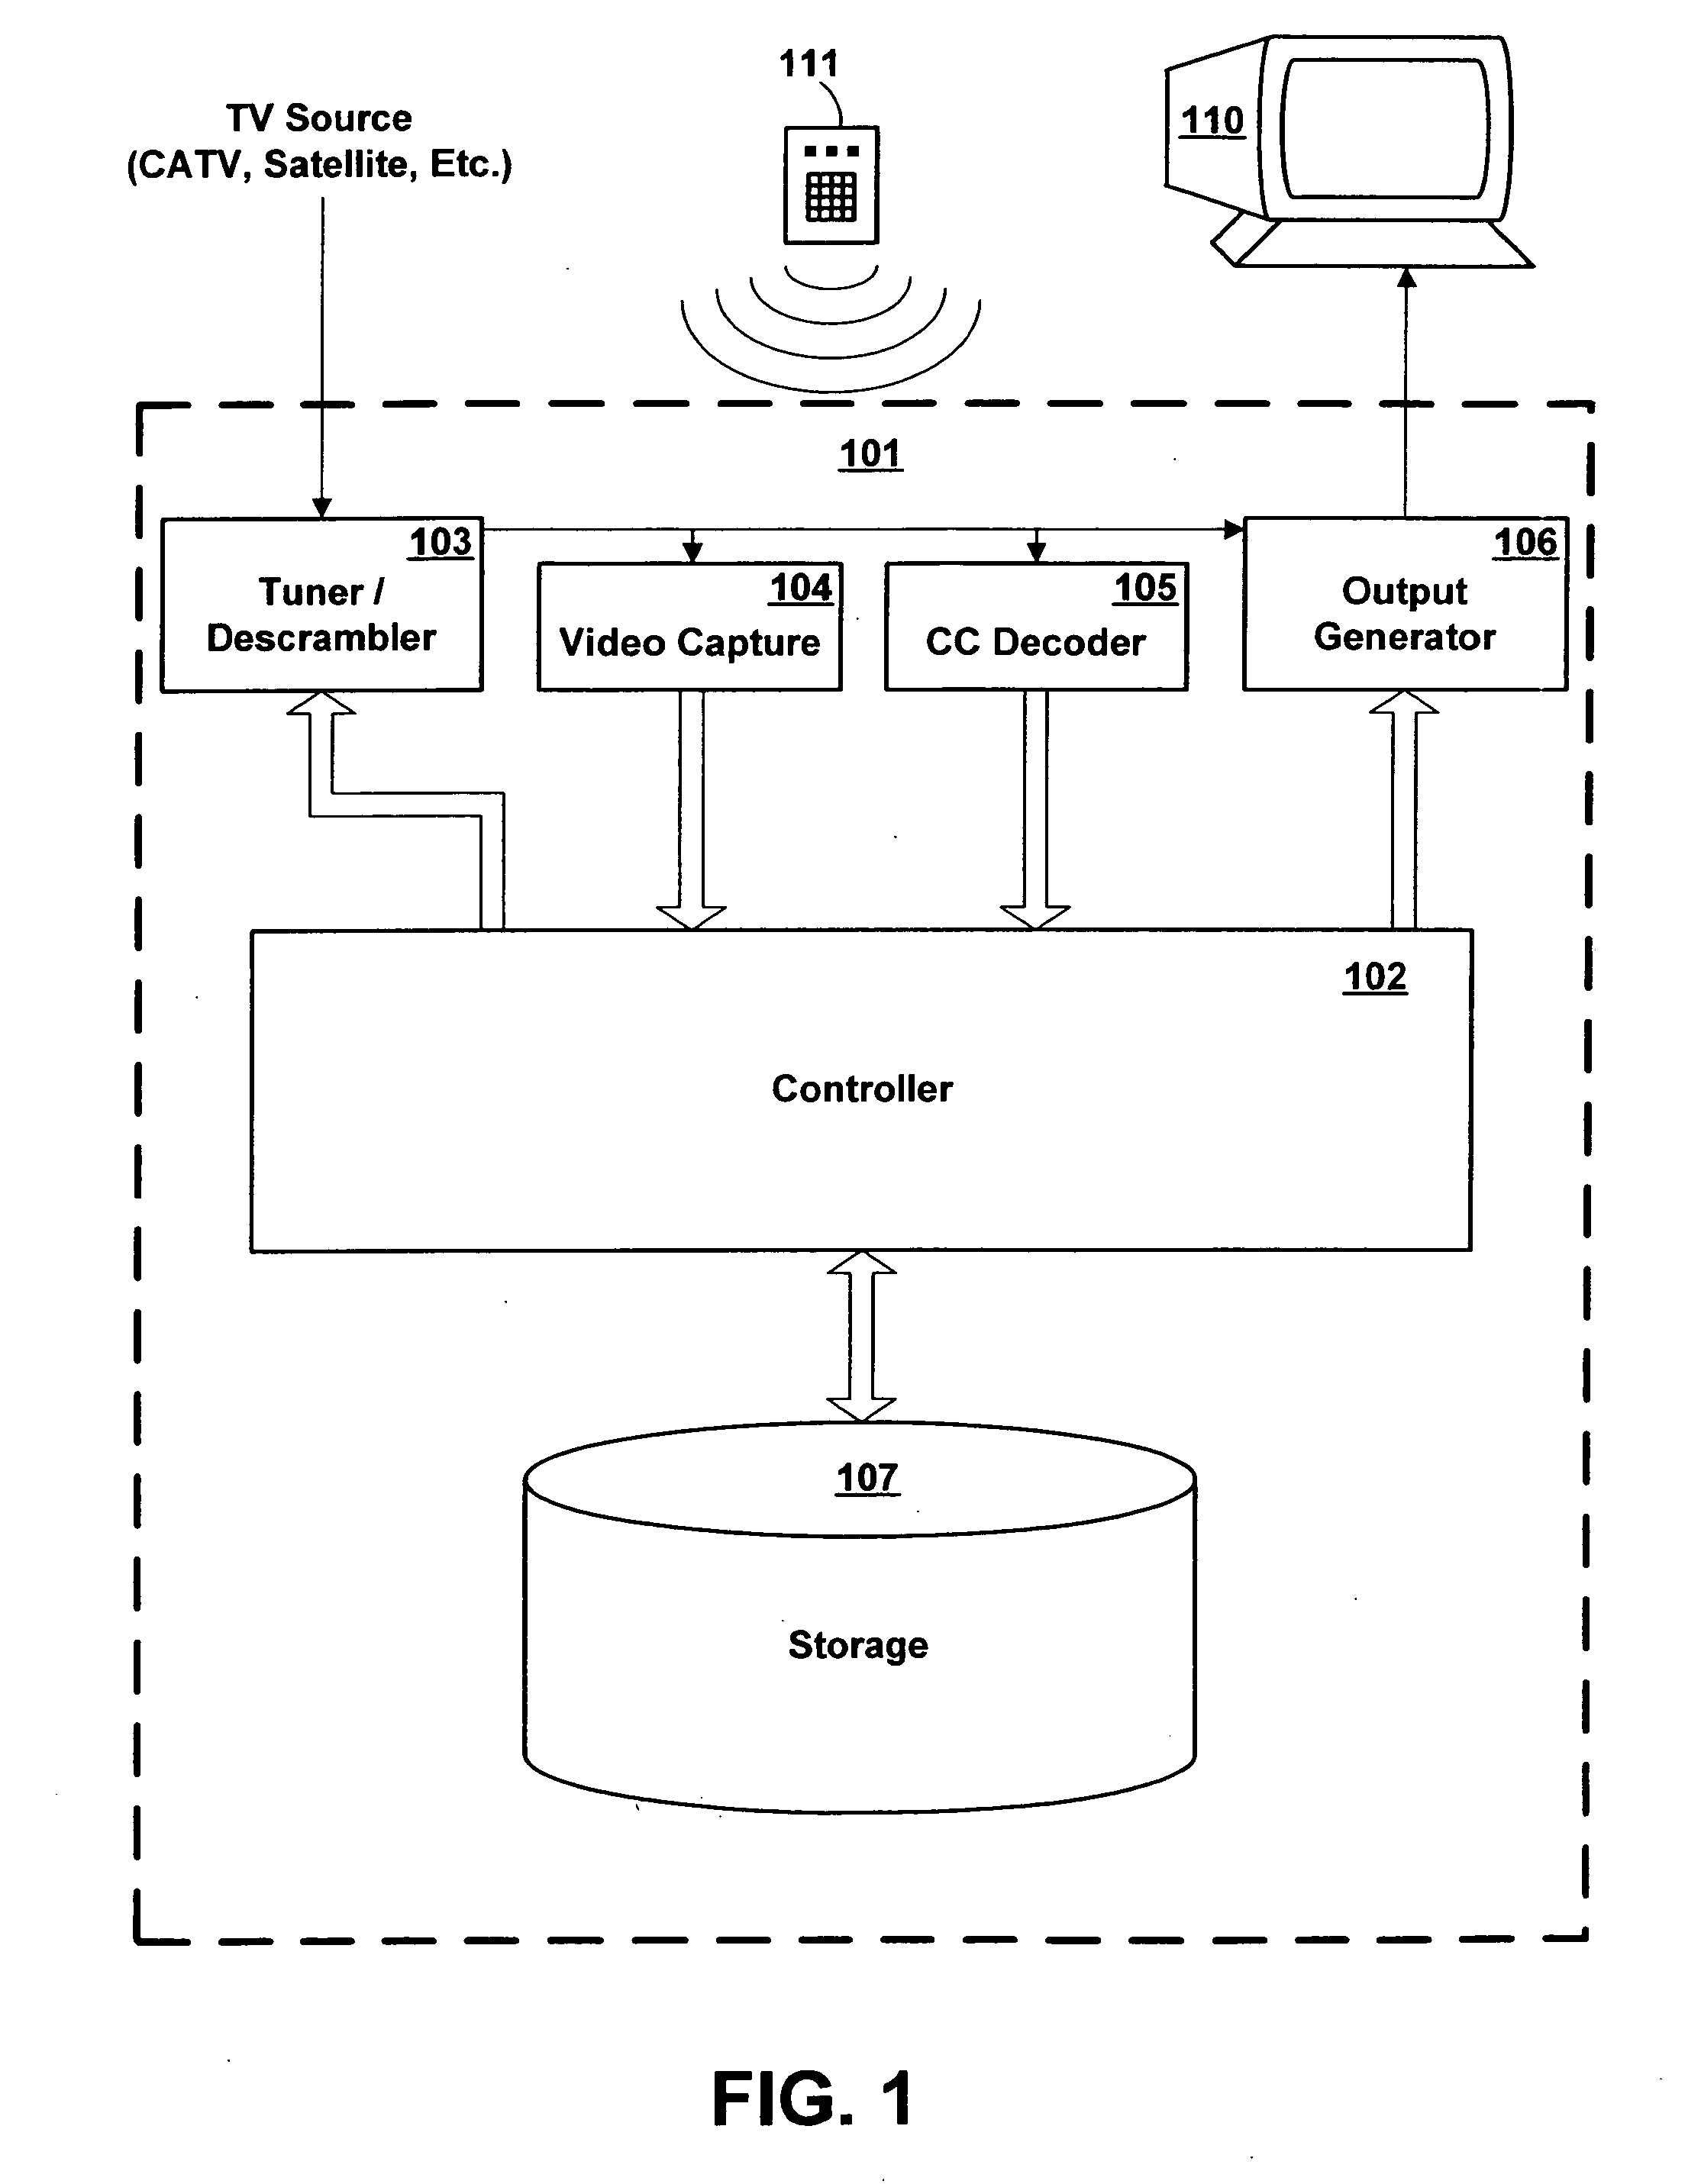 Method and apparatus for using closed captioning data to identify television programming content for recording